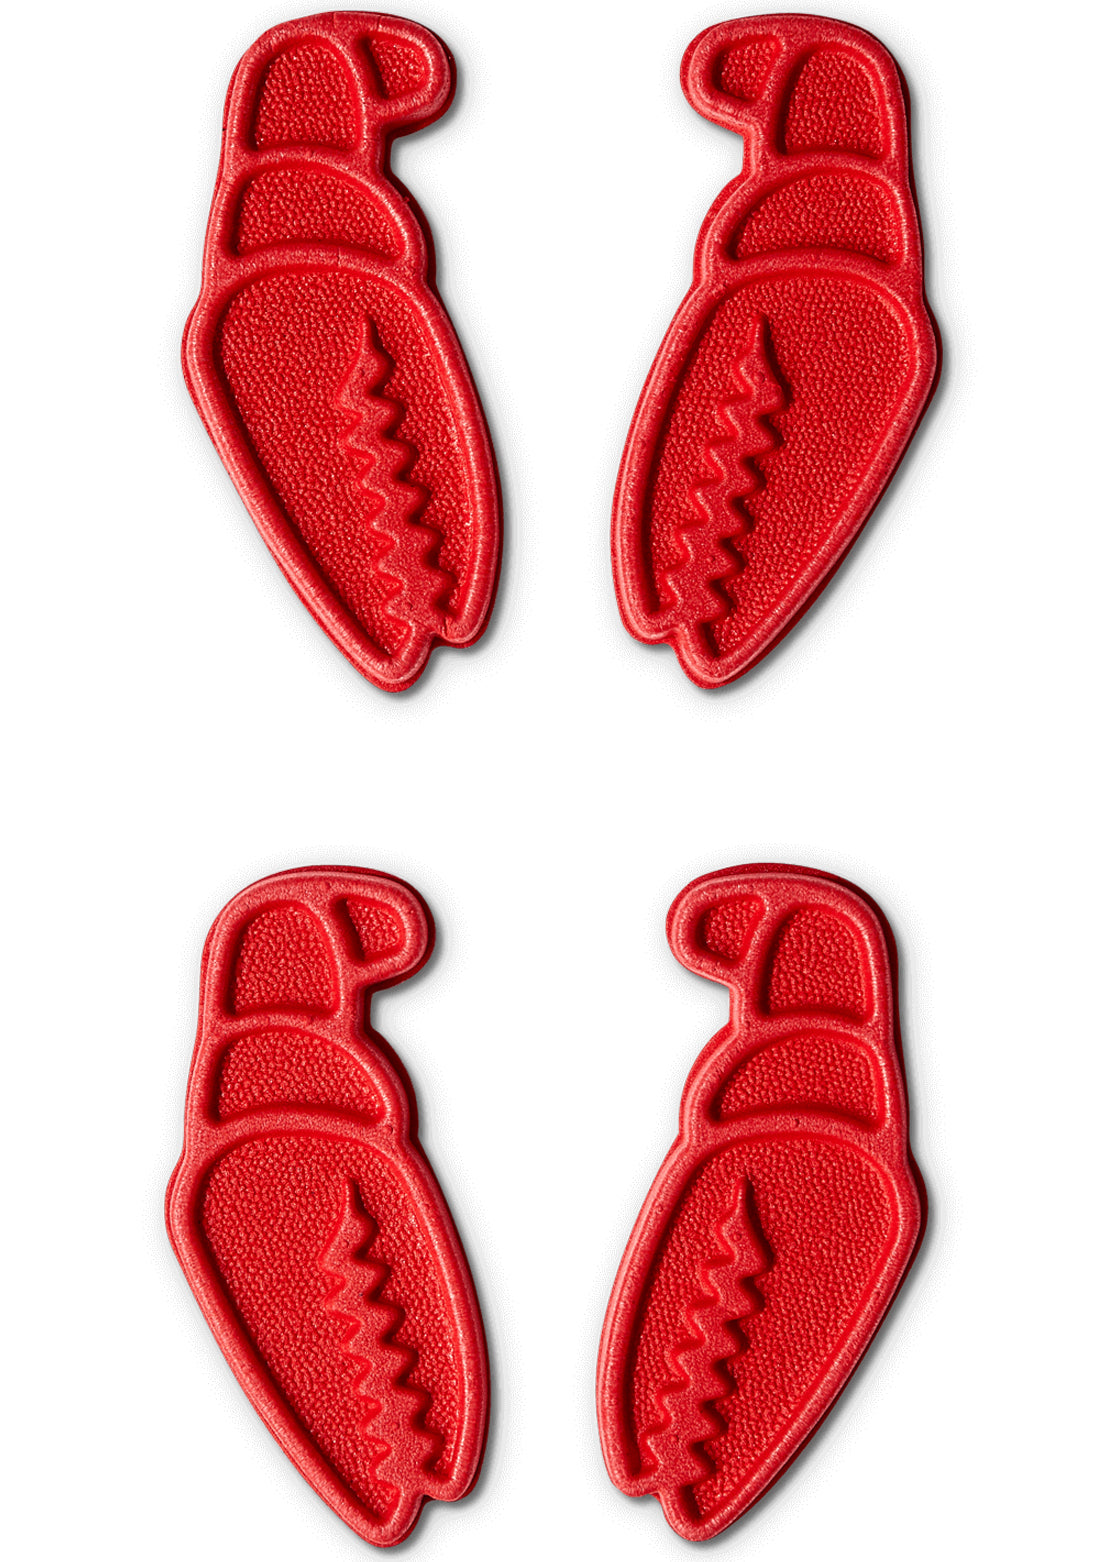 Crab Grab Mini Claws Traction Stomp Pad Red